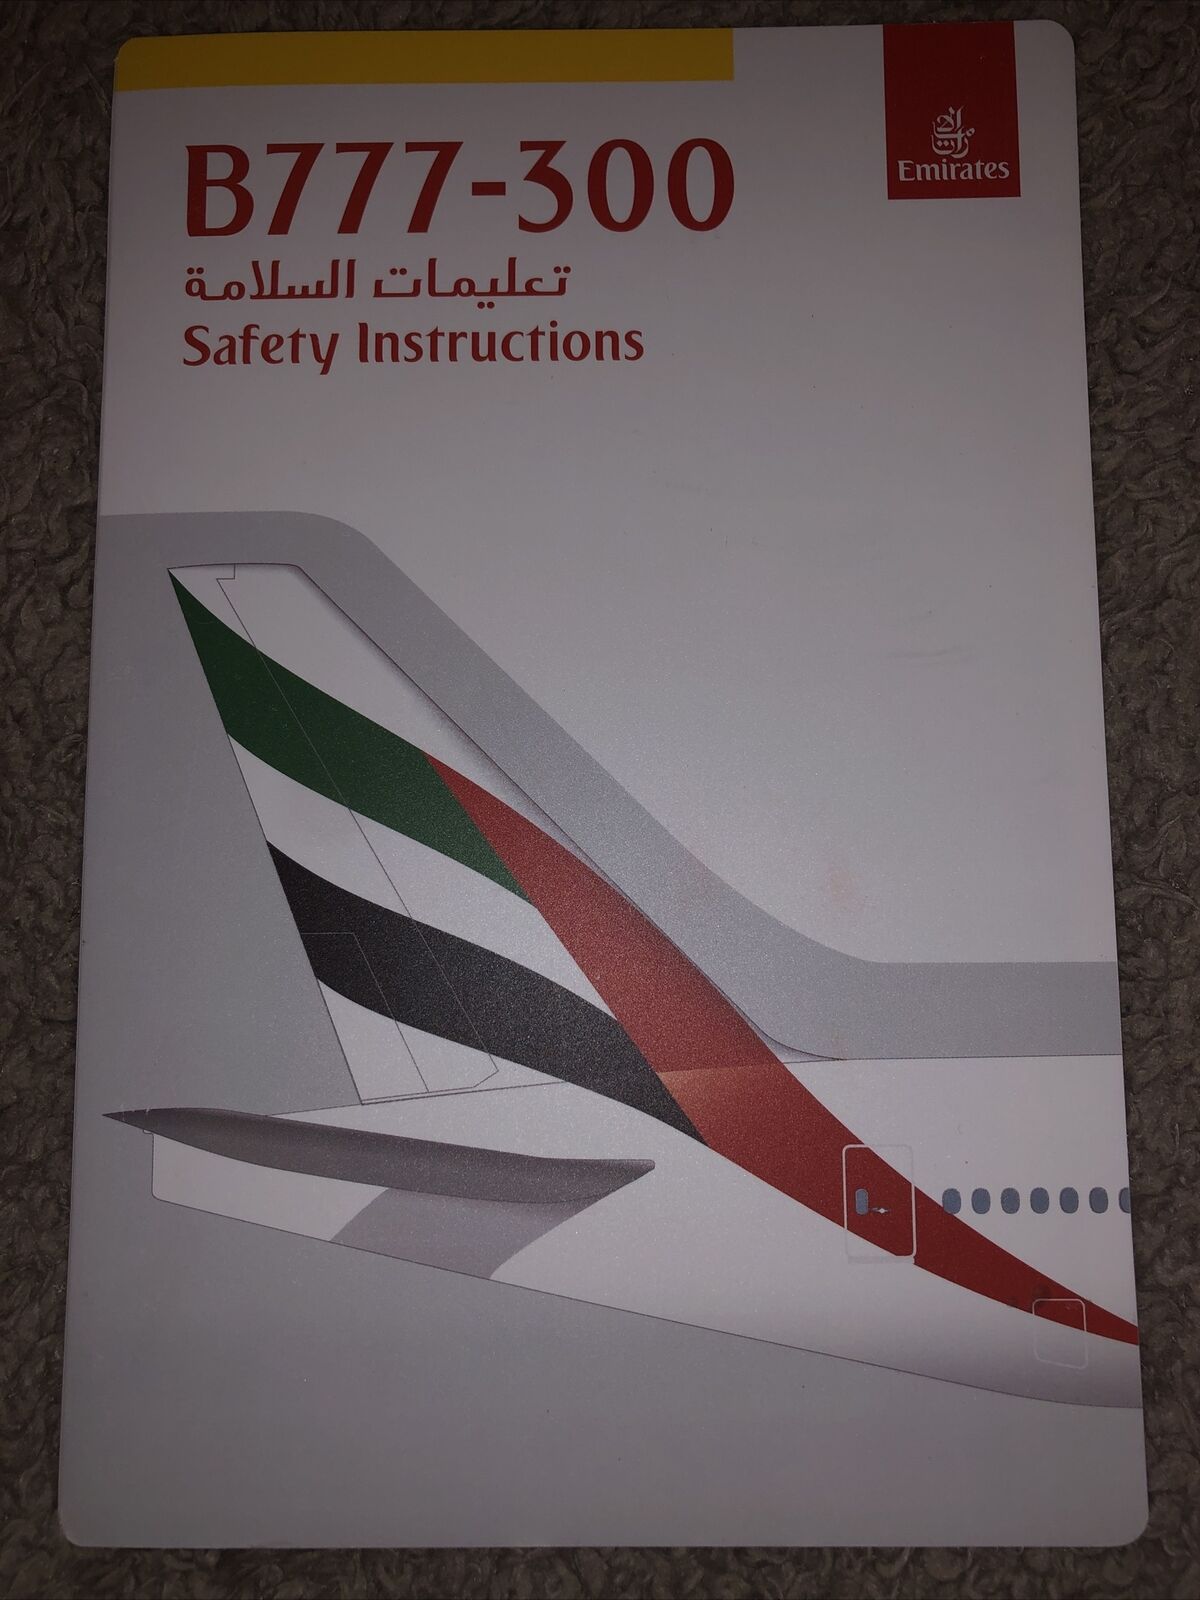 Emirates Airlines Boeing 777 300 Series Safety Card Version 3